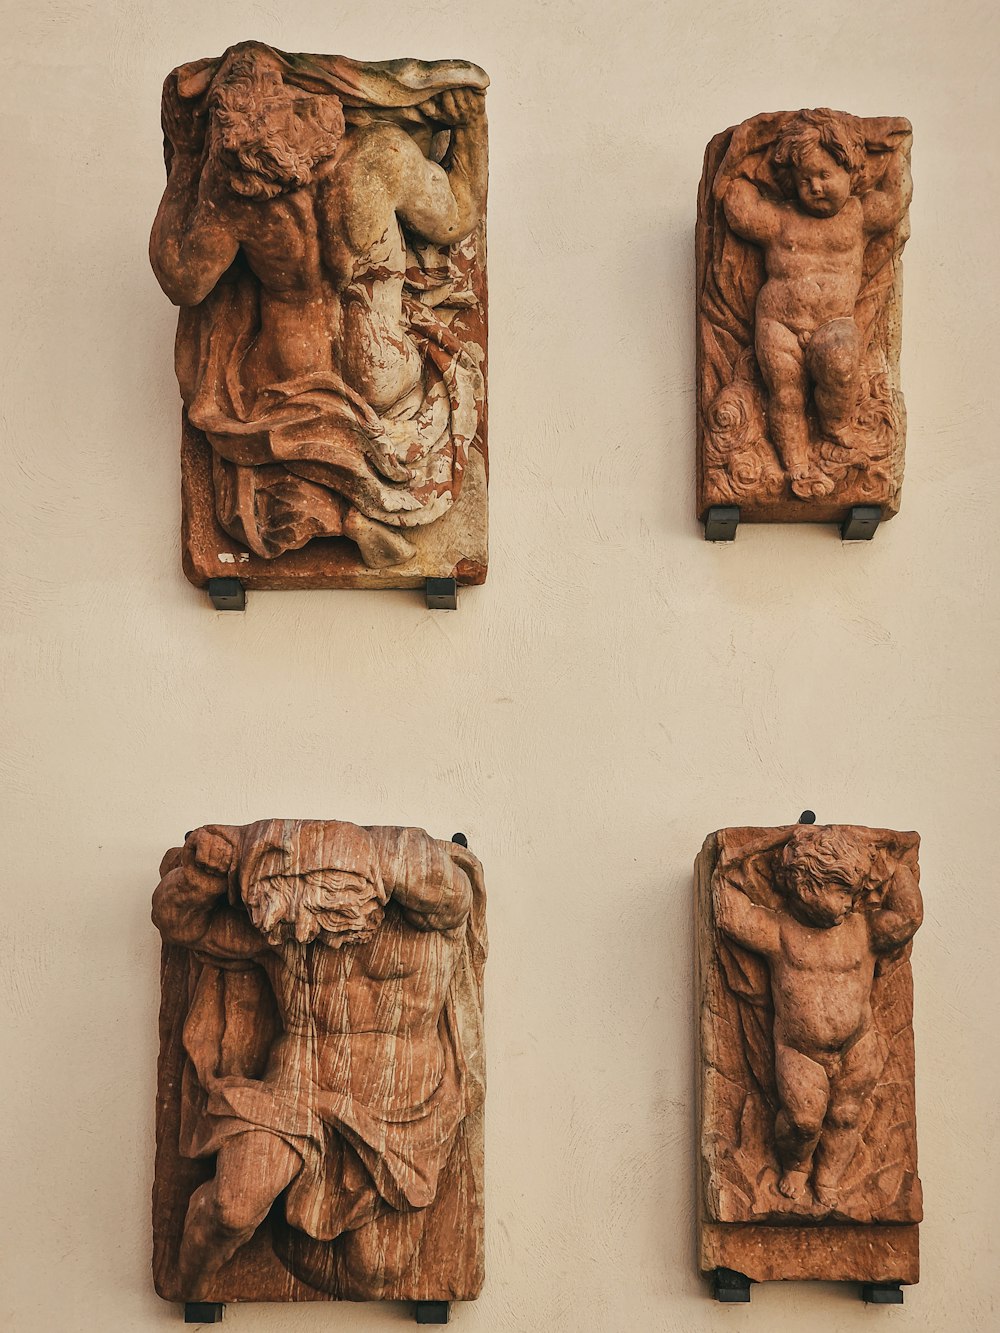 a group of four carved wooden sculptures on a wall